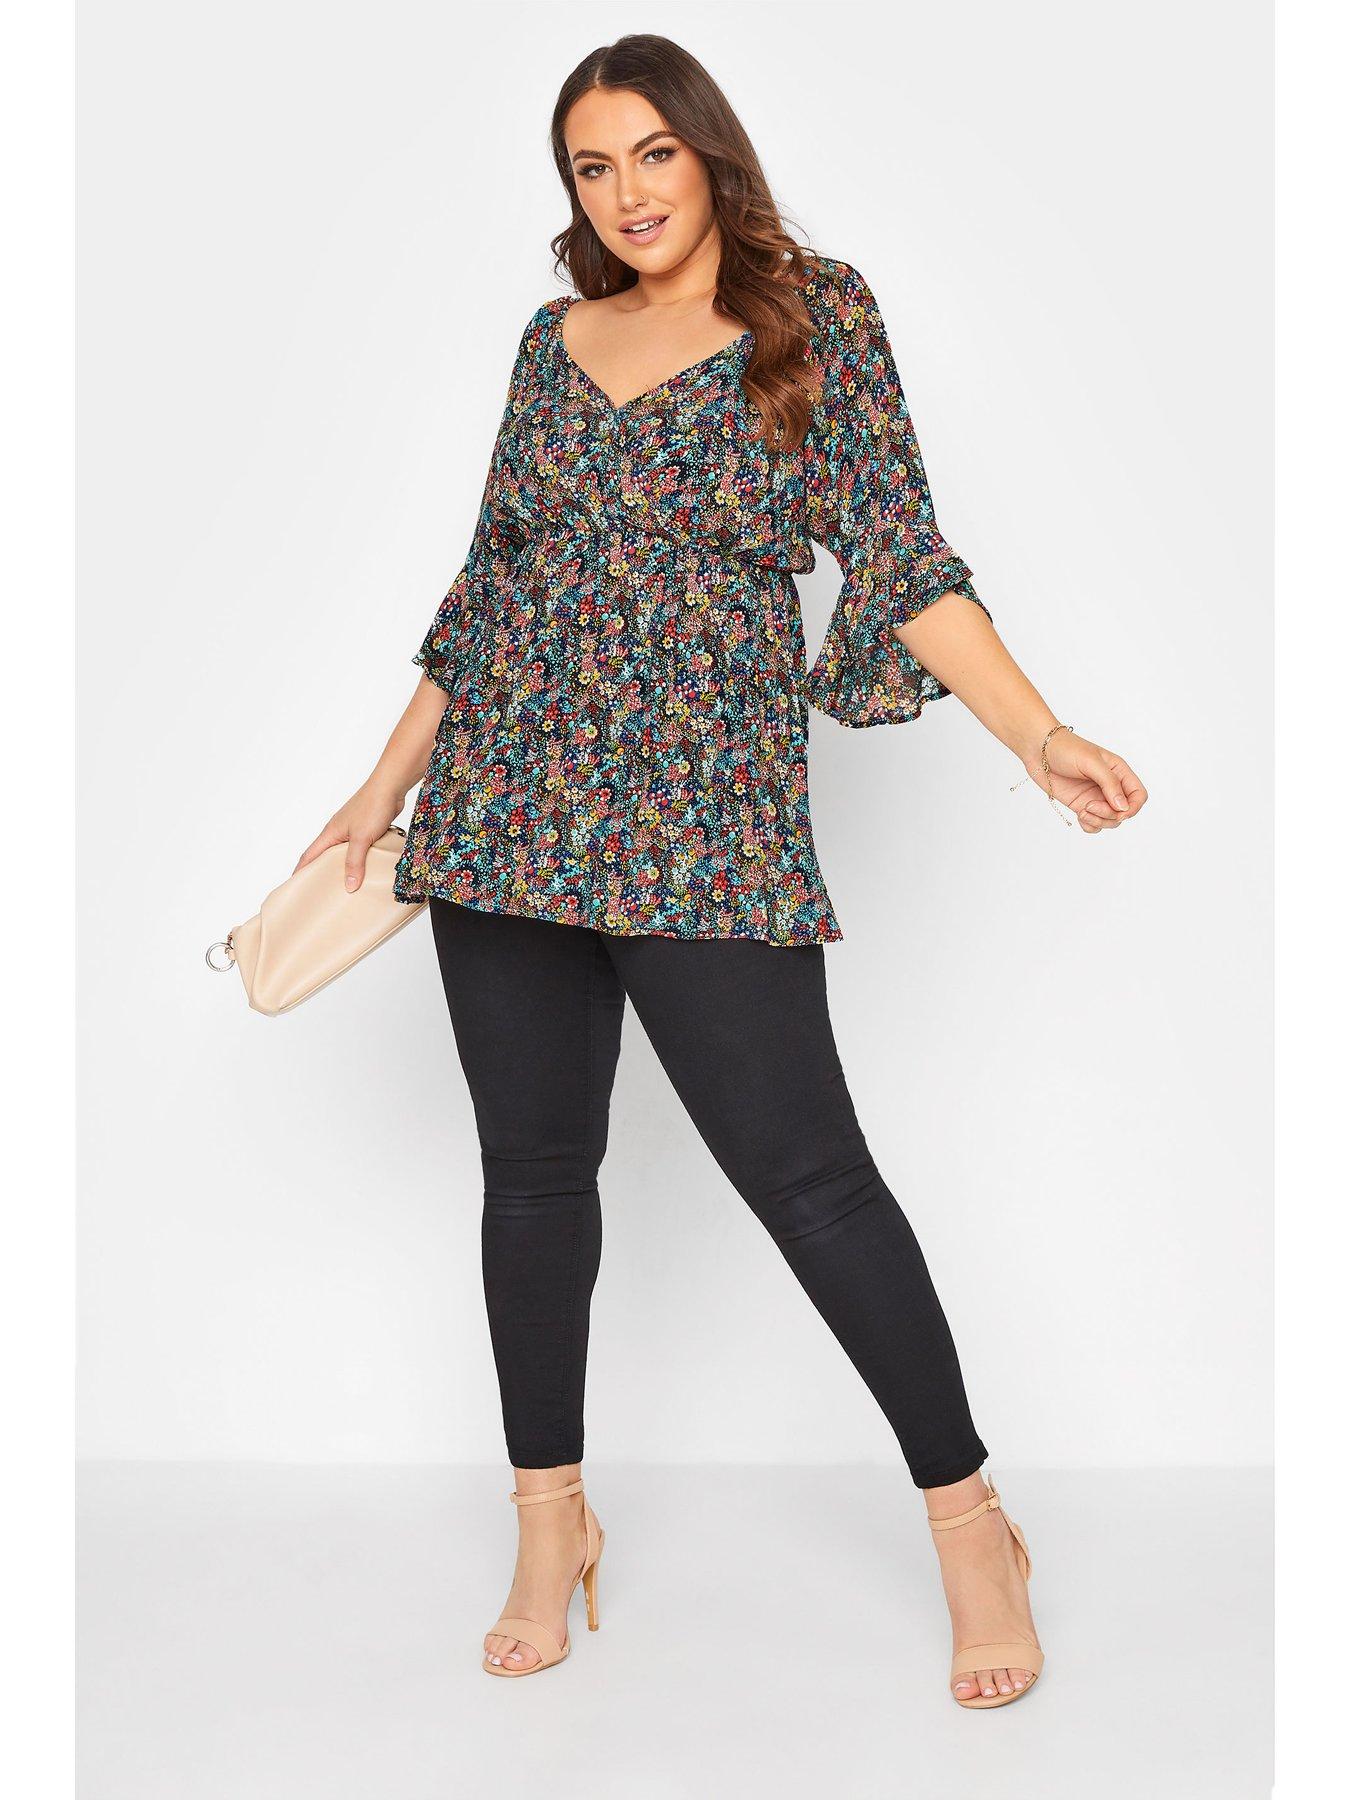 Blouses & shirts Yours London Ditsy Floral Wrap Top - Black